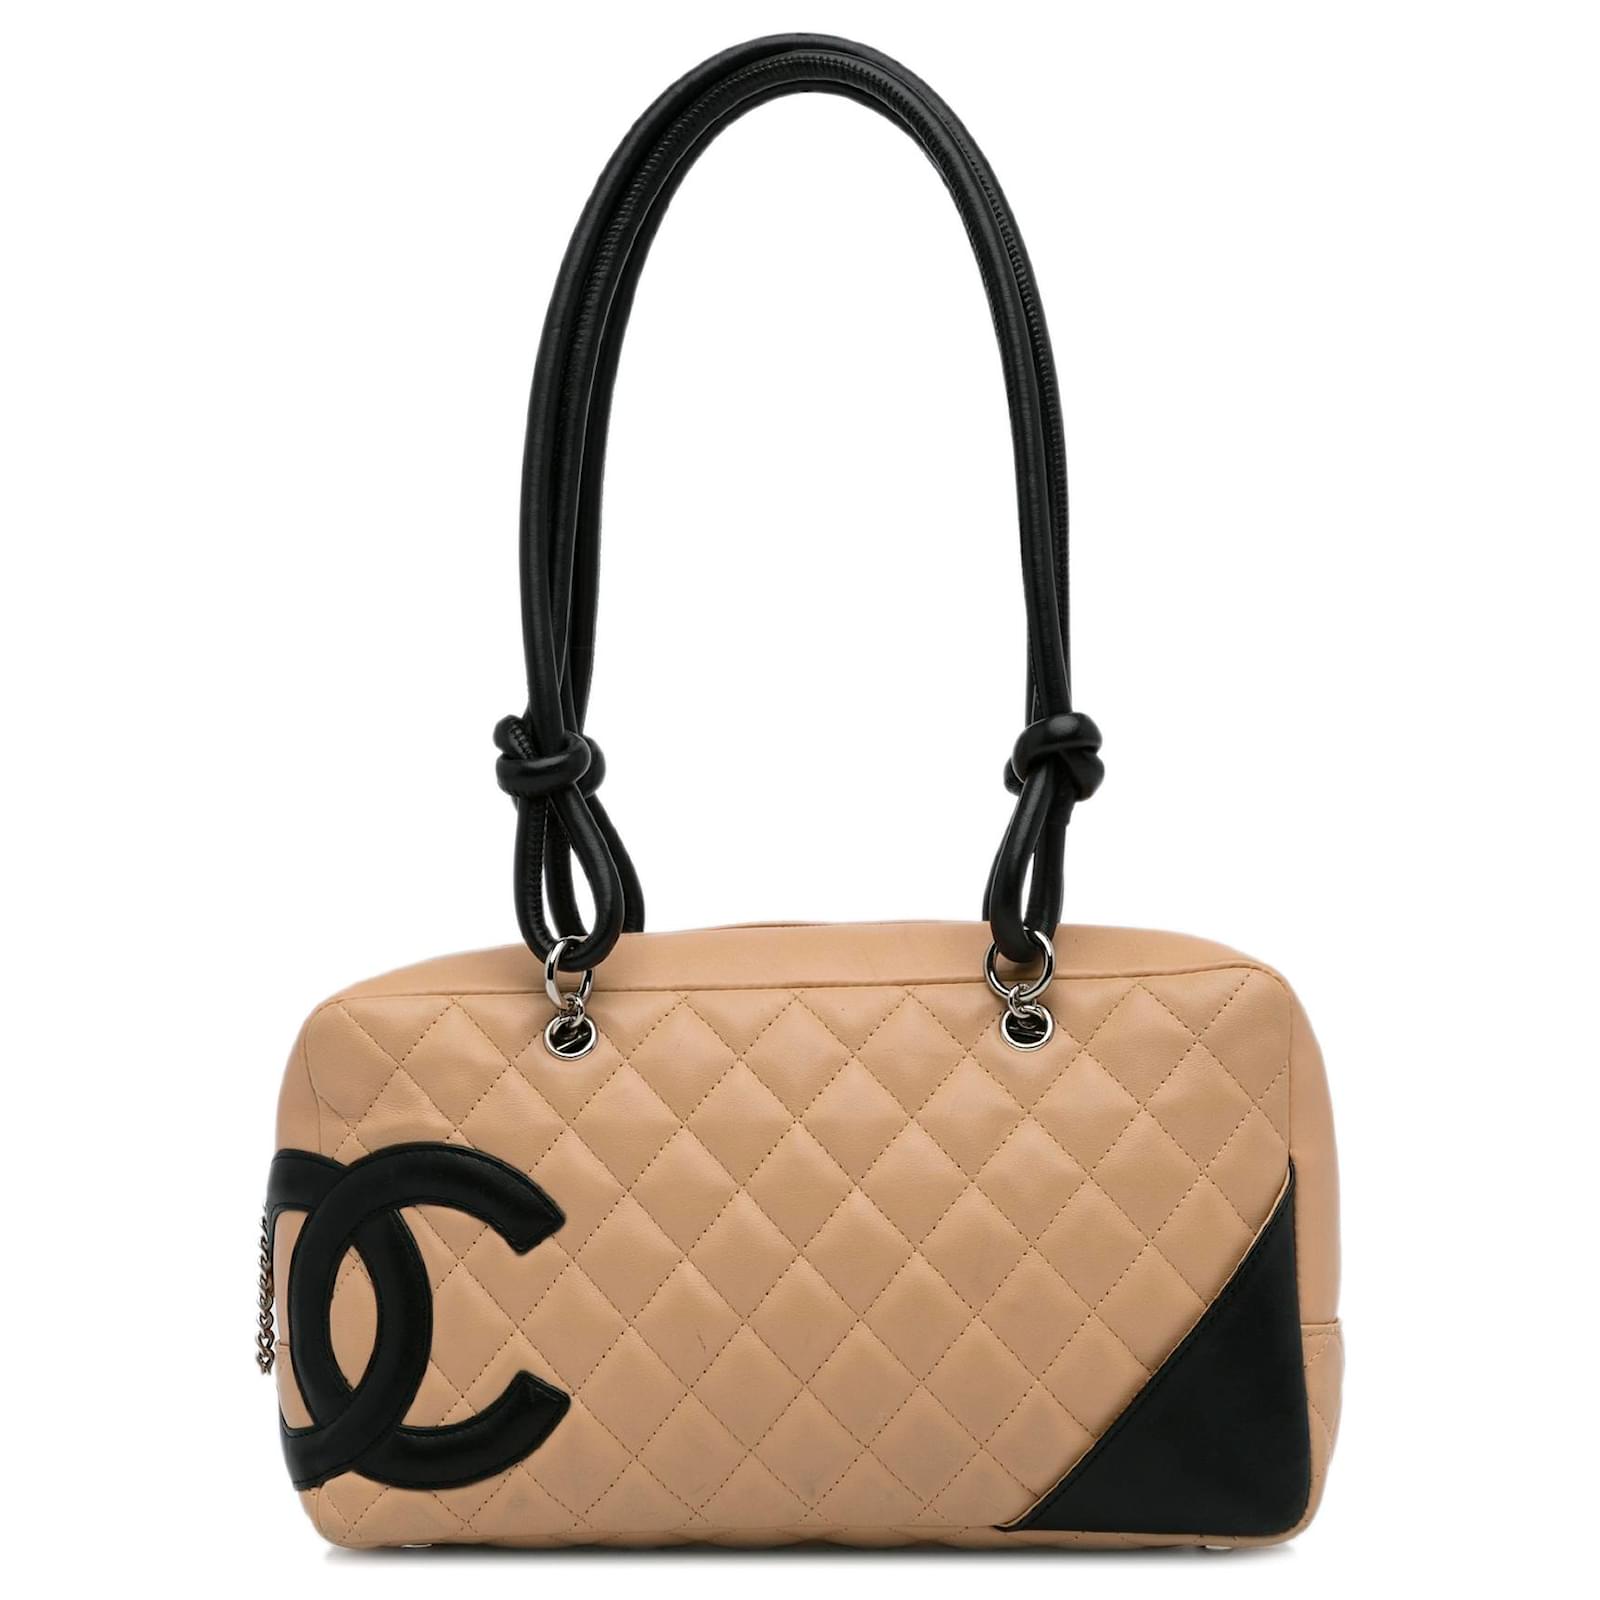 CHANEL Quilted Distressed Glazed Gold Leather Accordion Flap